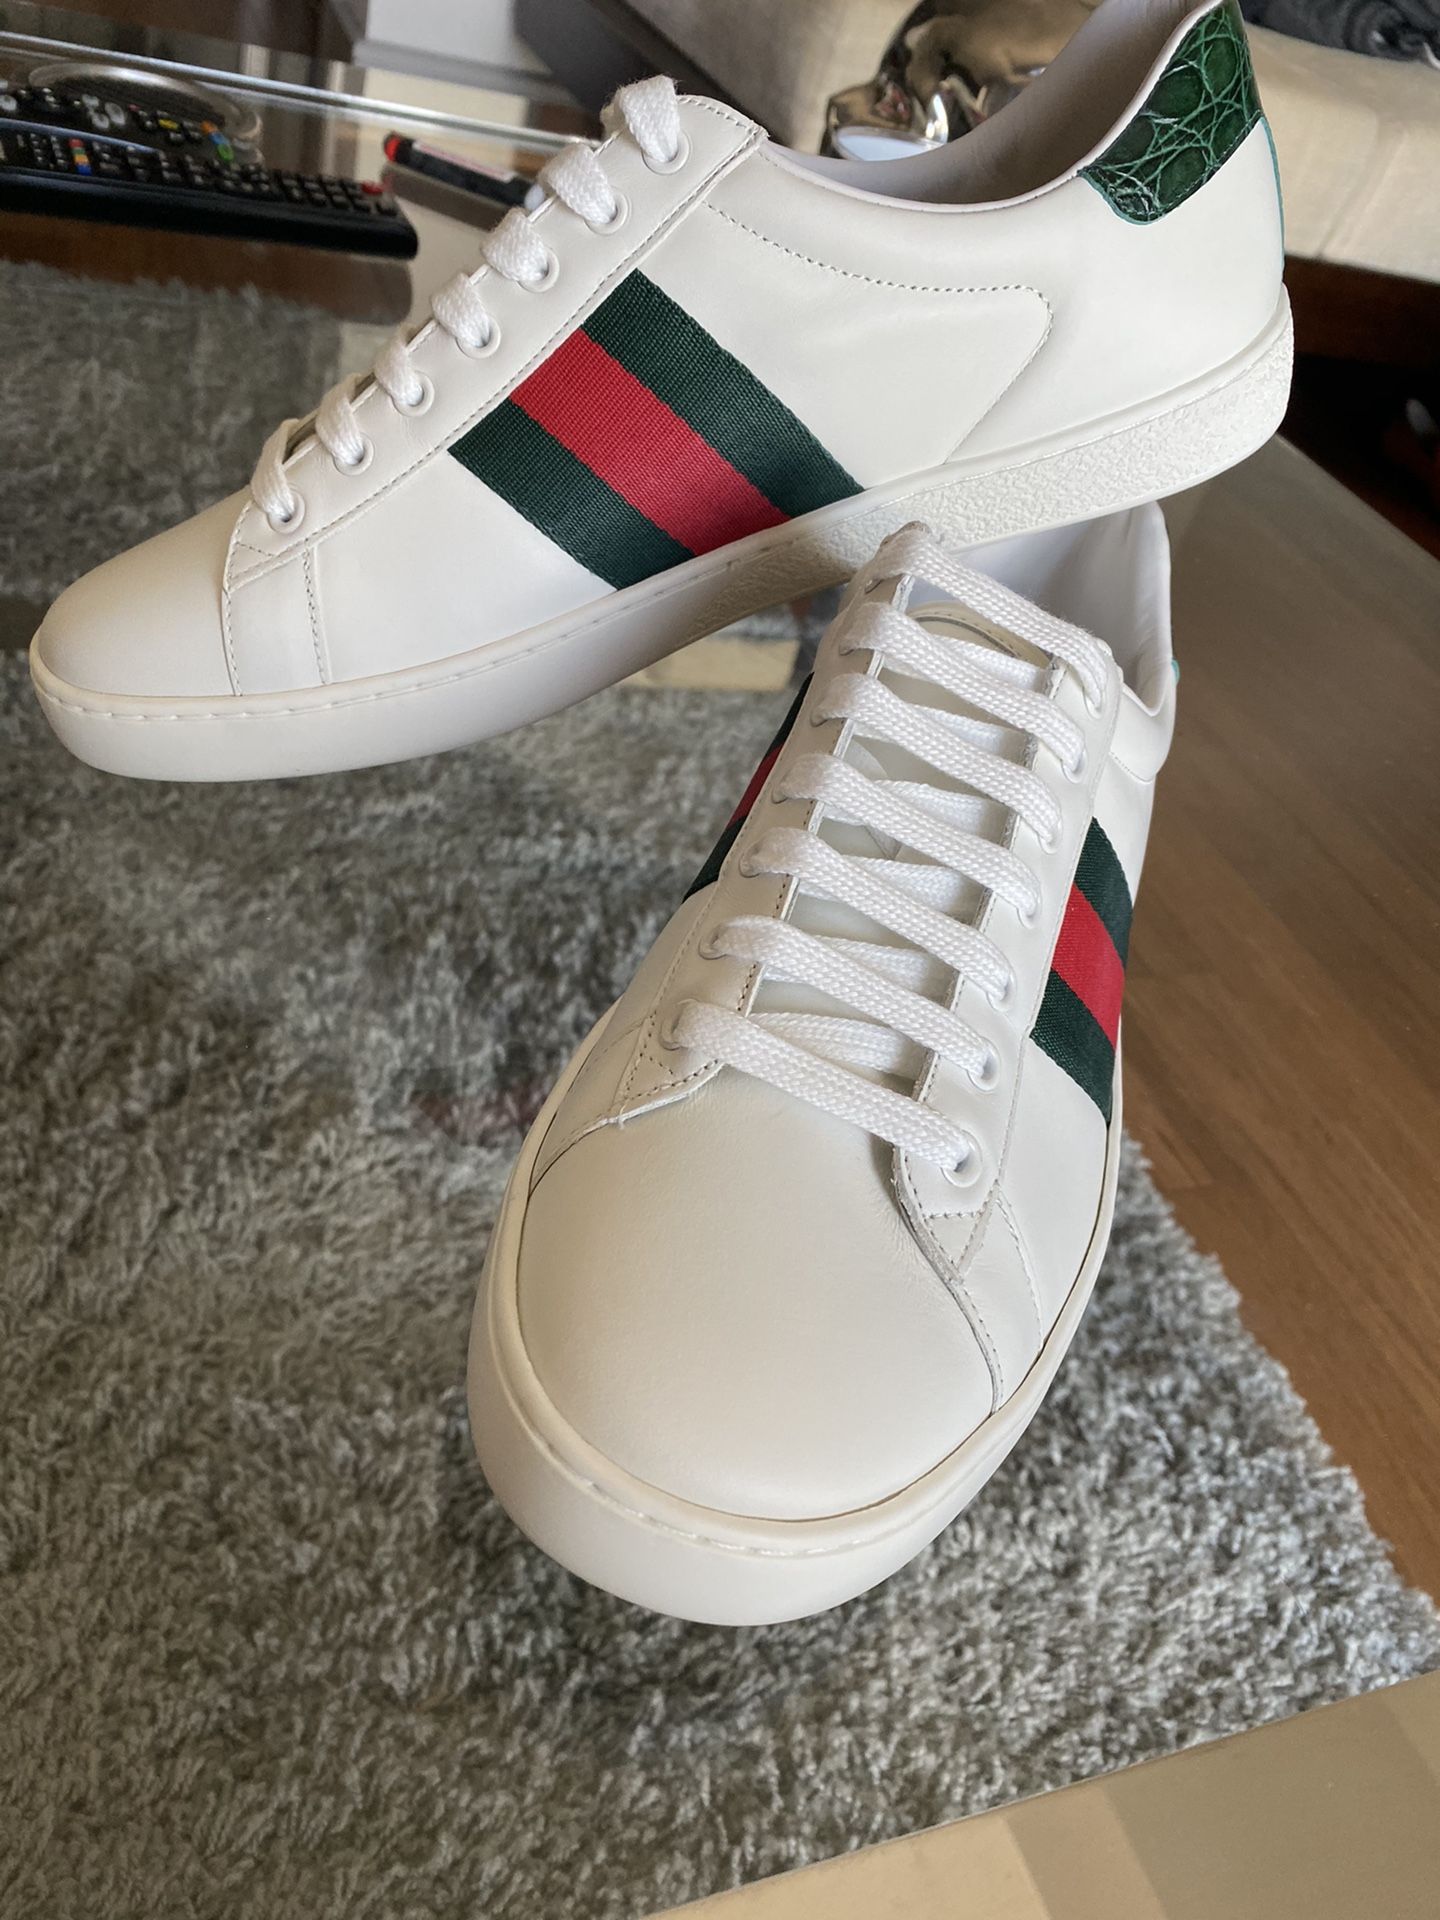 Gucci Ace Sneakers Size 10